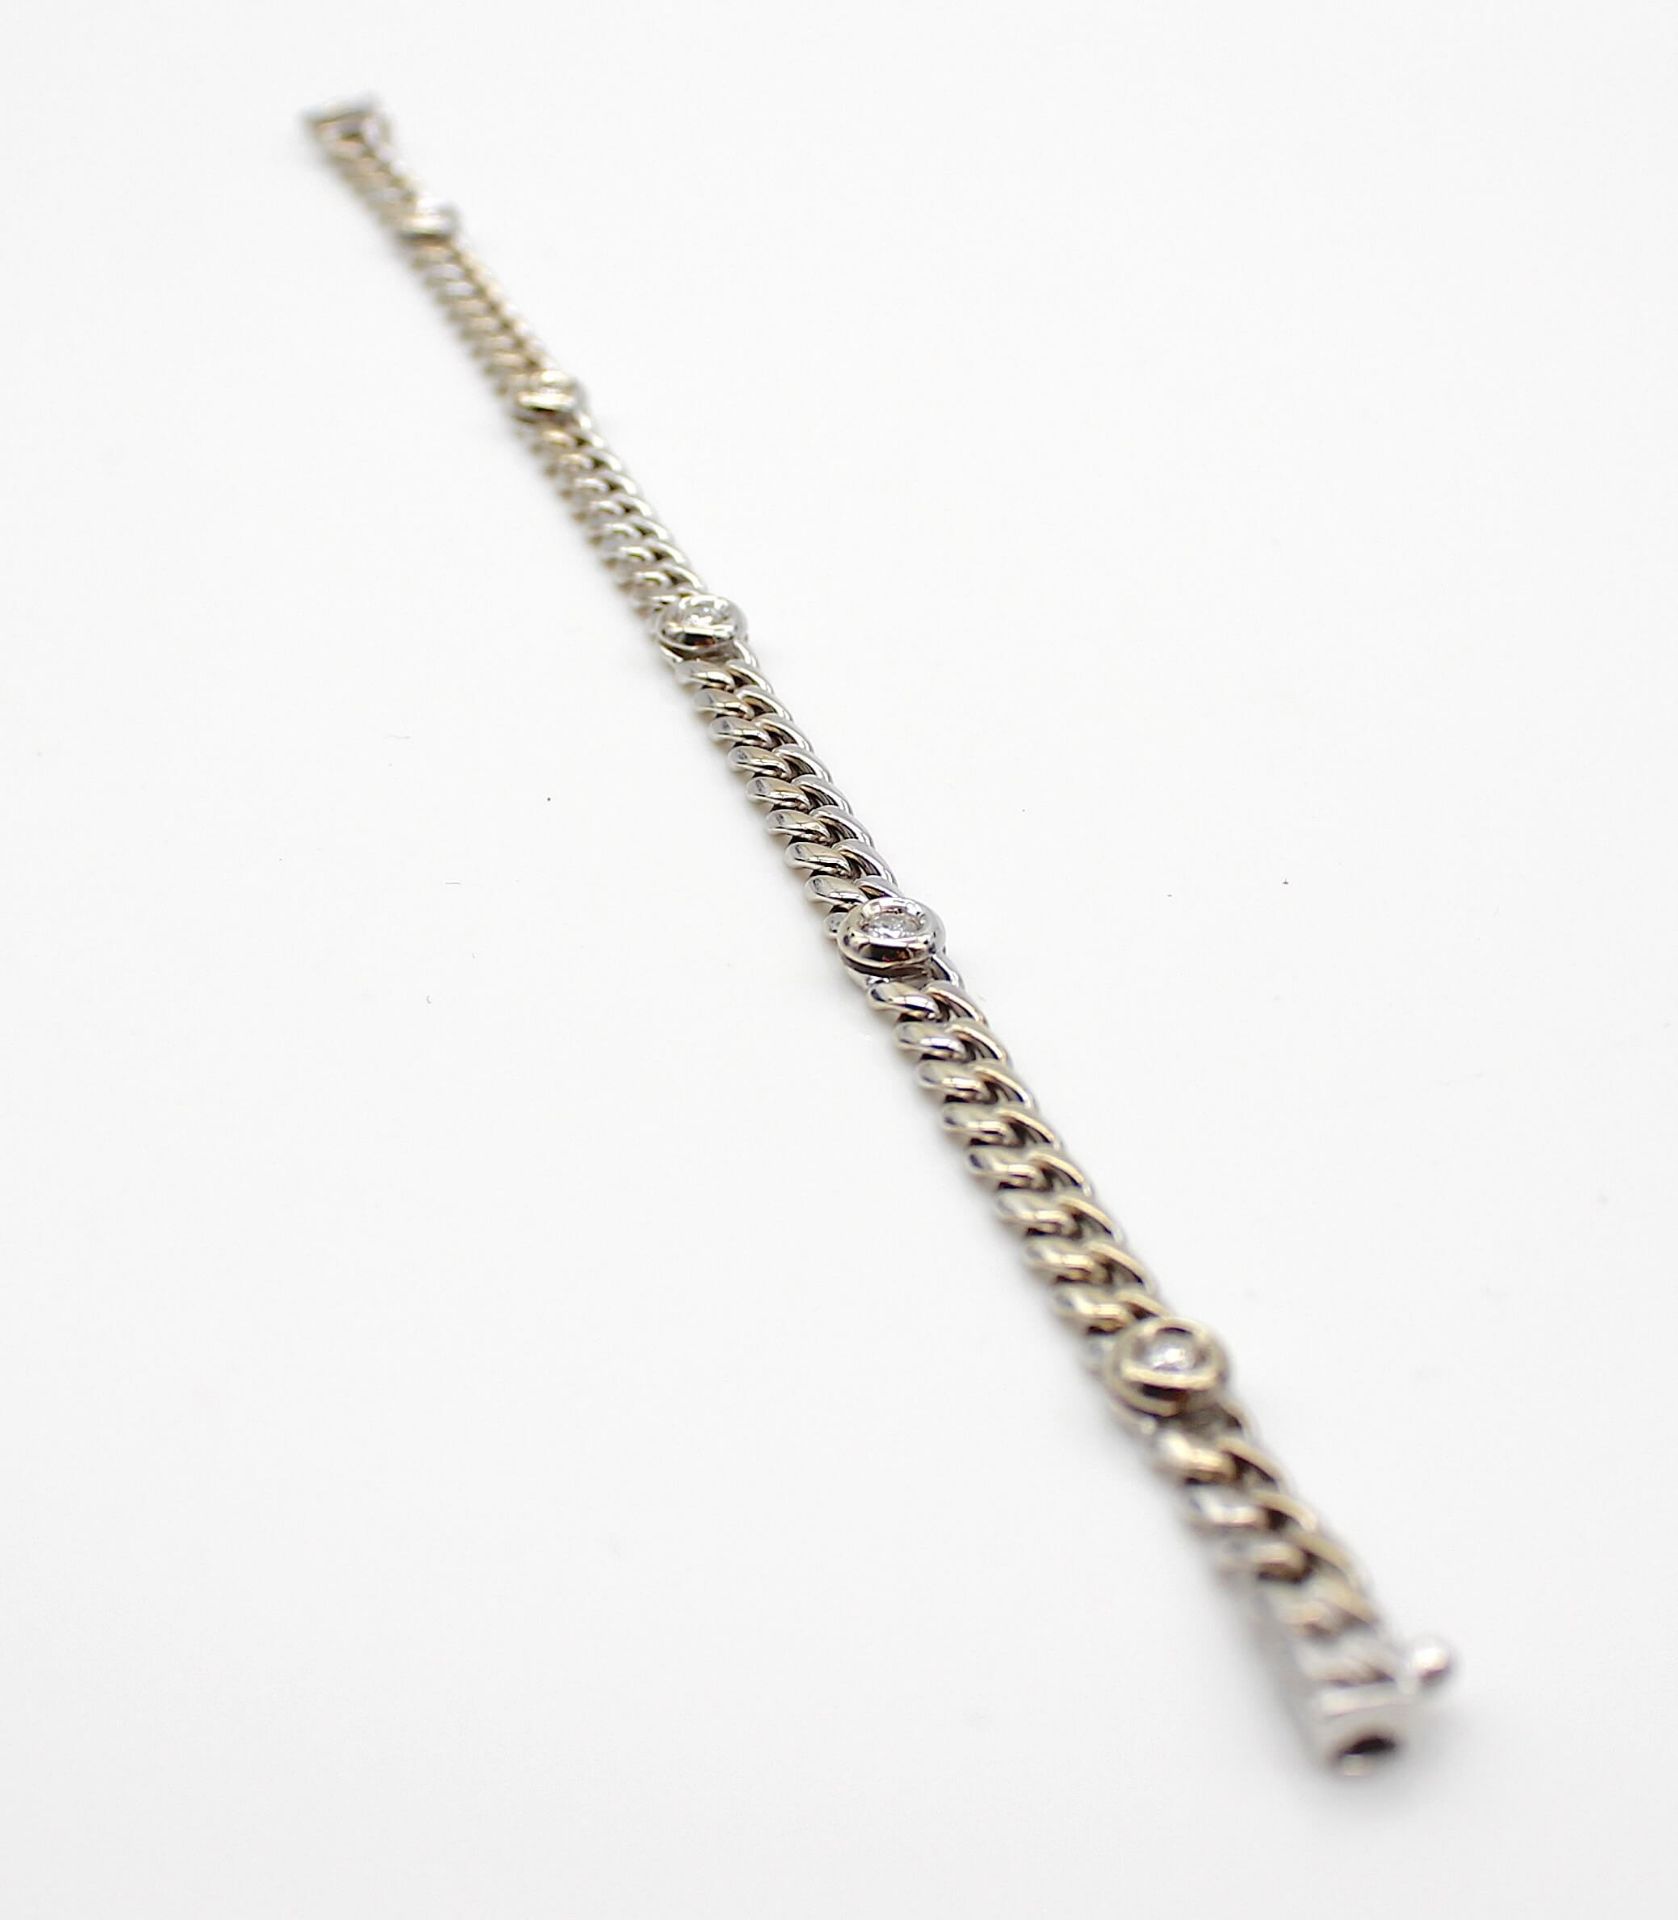 Bracelet in 585 white gold with 5 brilliants, total approx. 0.50 ct, SI, G - H.Weight 17 g, length - Bild 3 aus 3